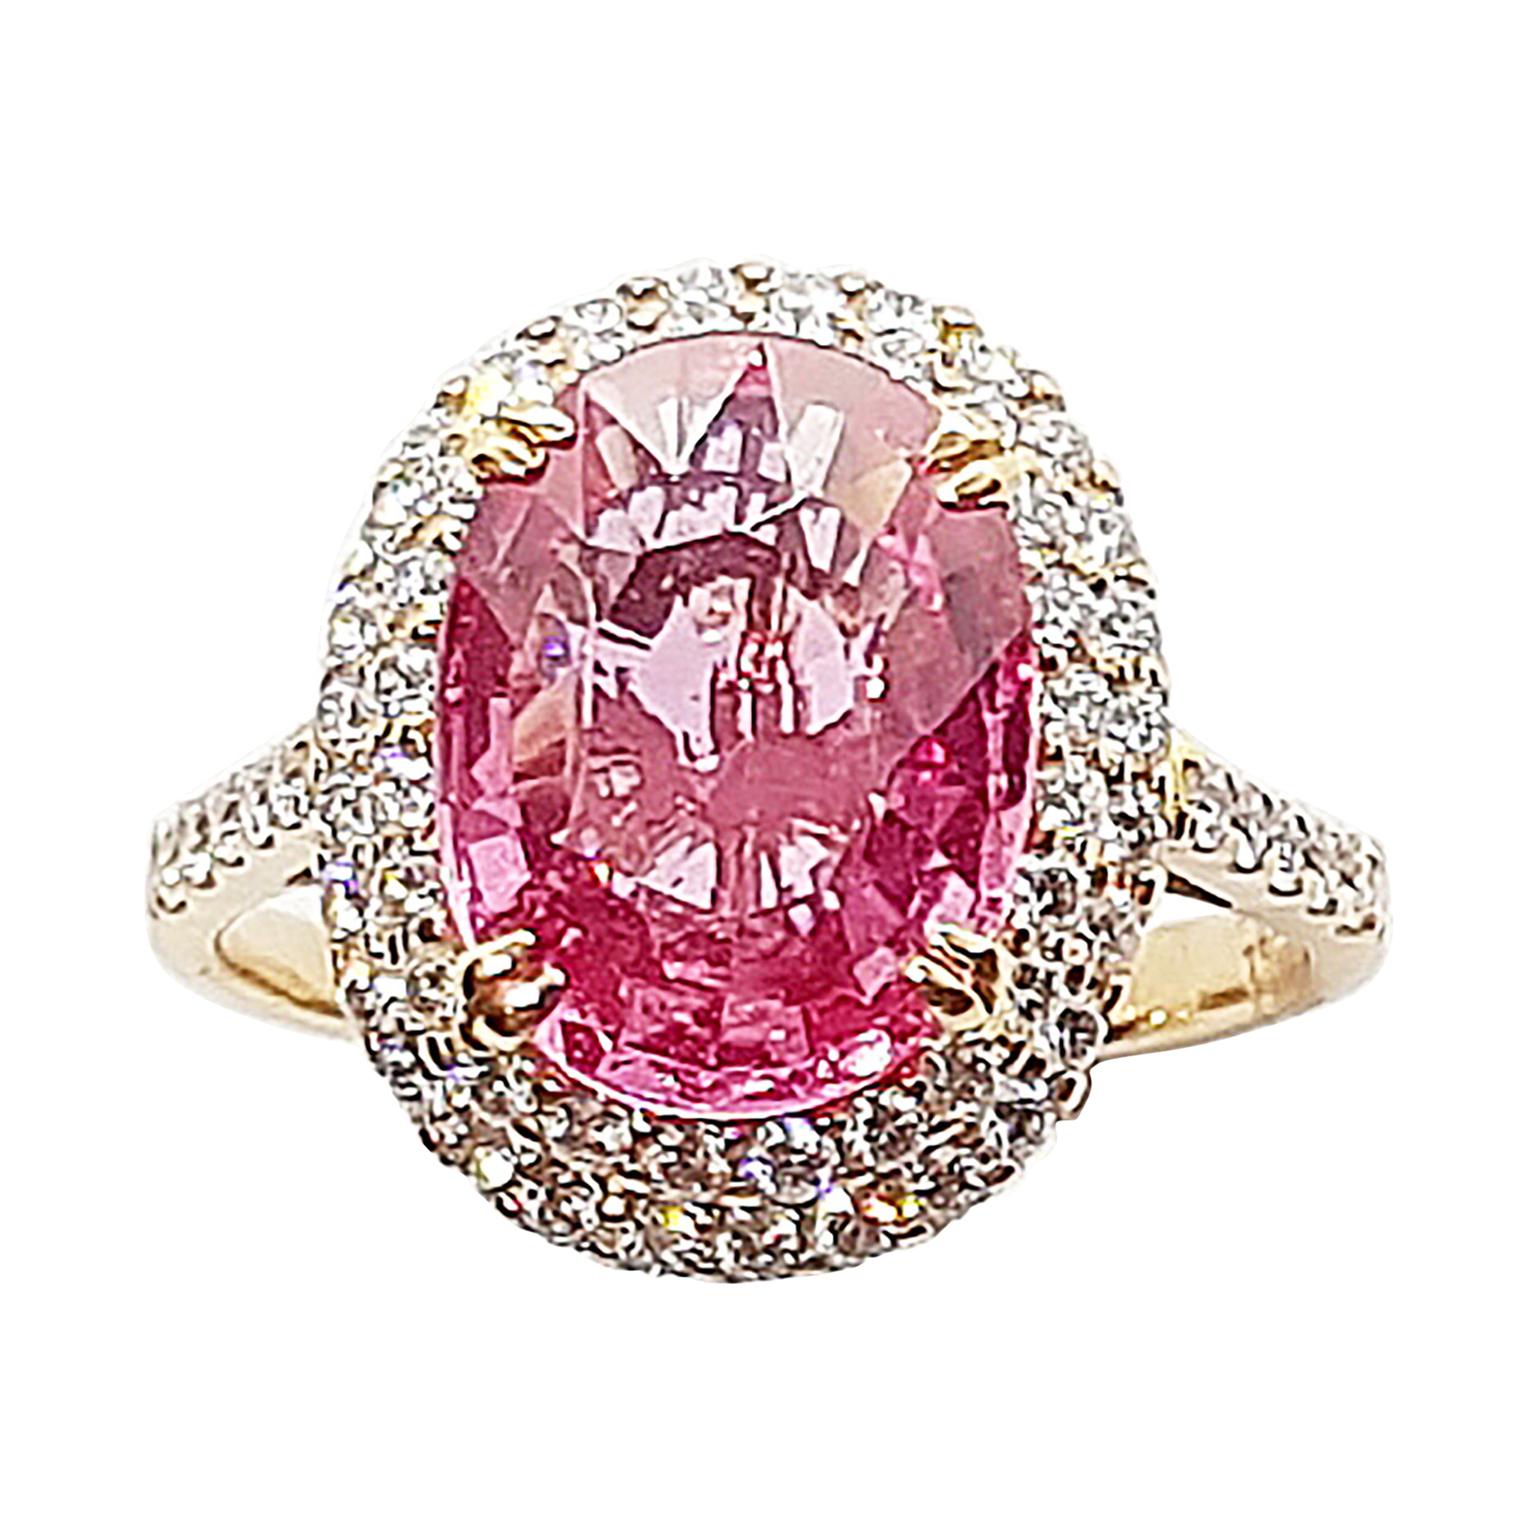 GRS Certified 4 Cts Padparadscha Sapphire with Diamond Ring Set 18k Rose Gold